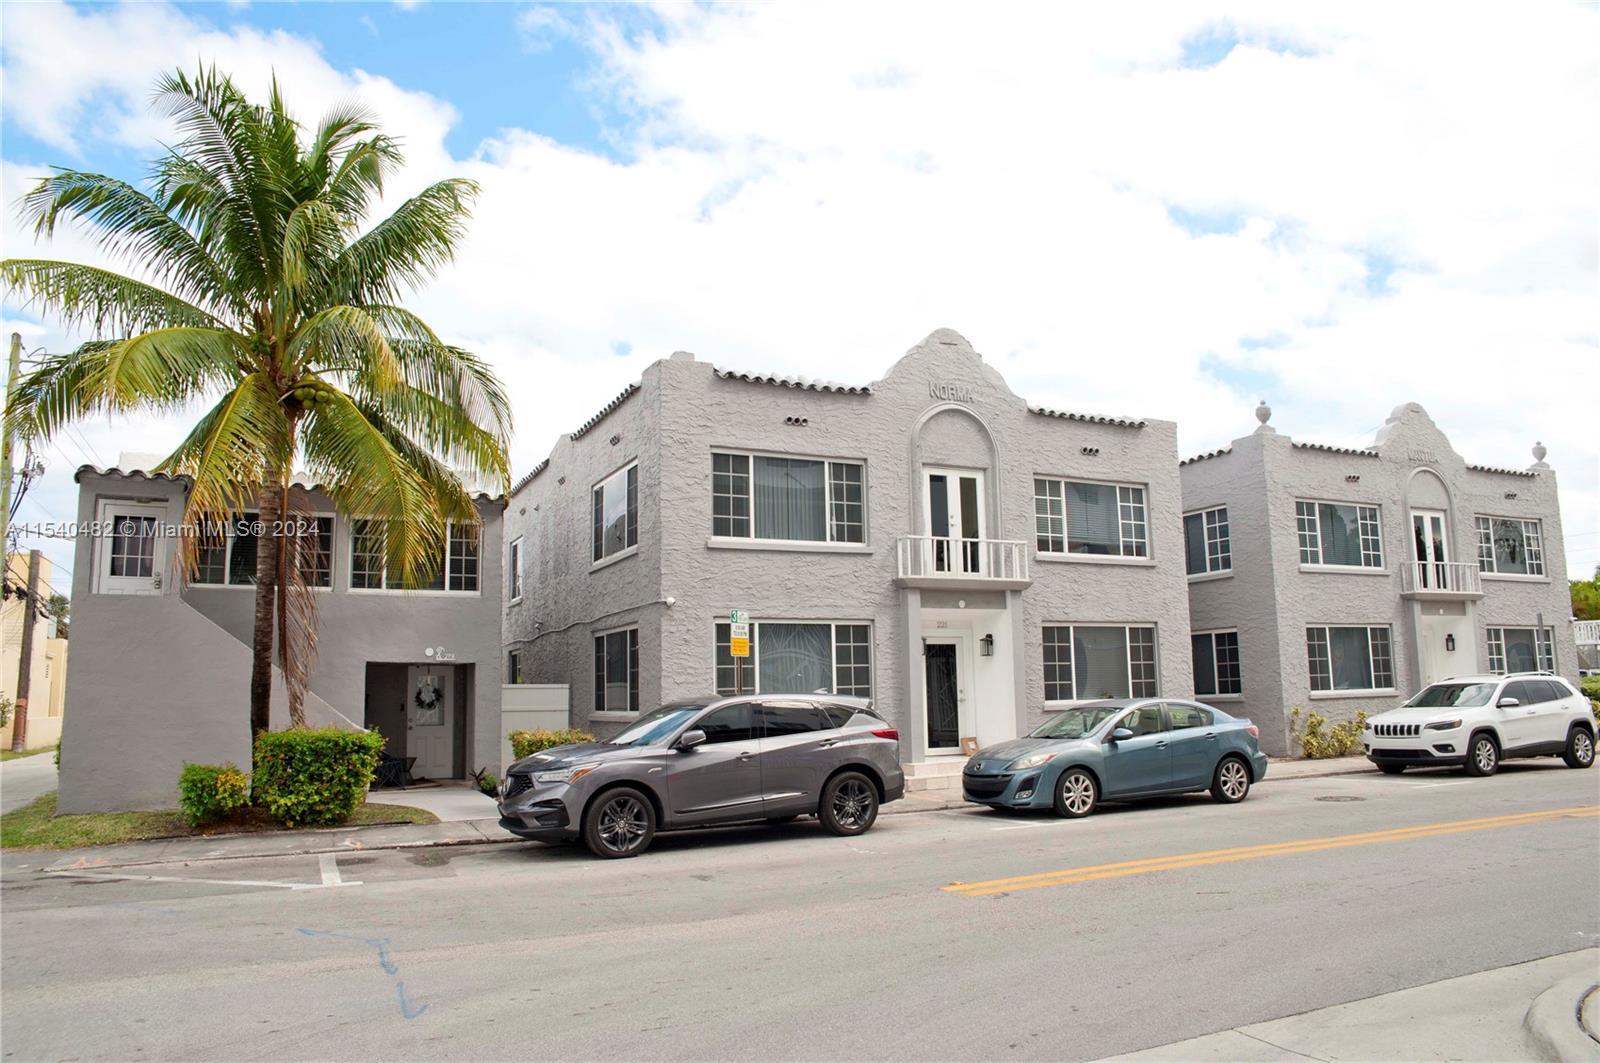 Photo of 219-223 S 17 Ave #1-10 in Hollywood, FL